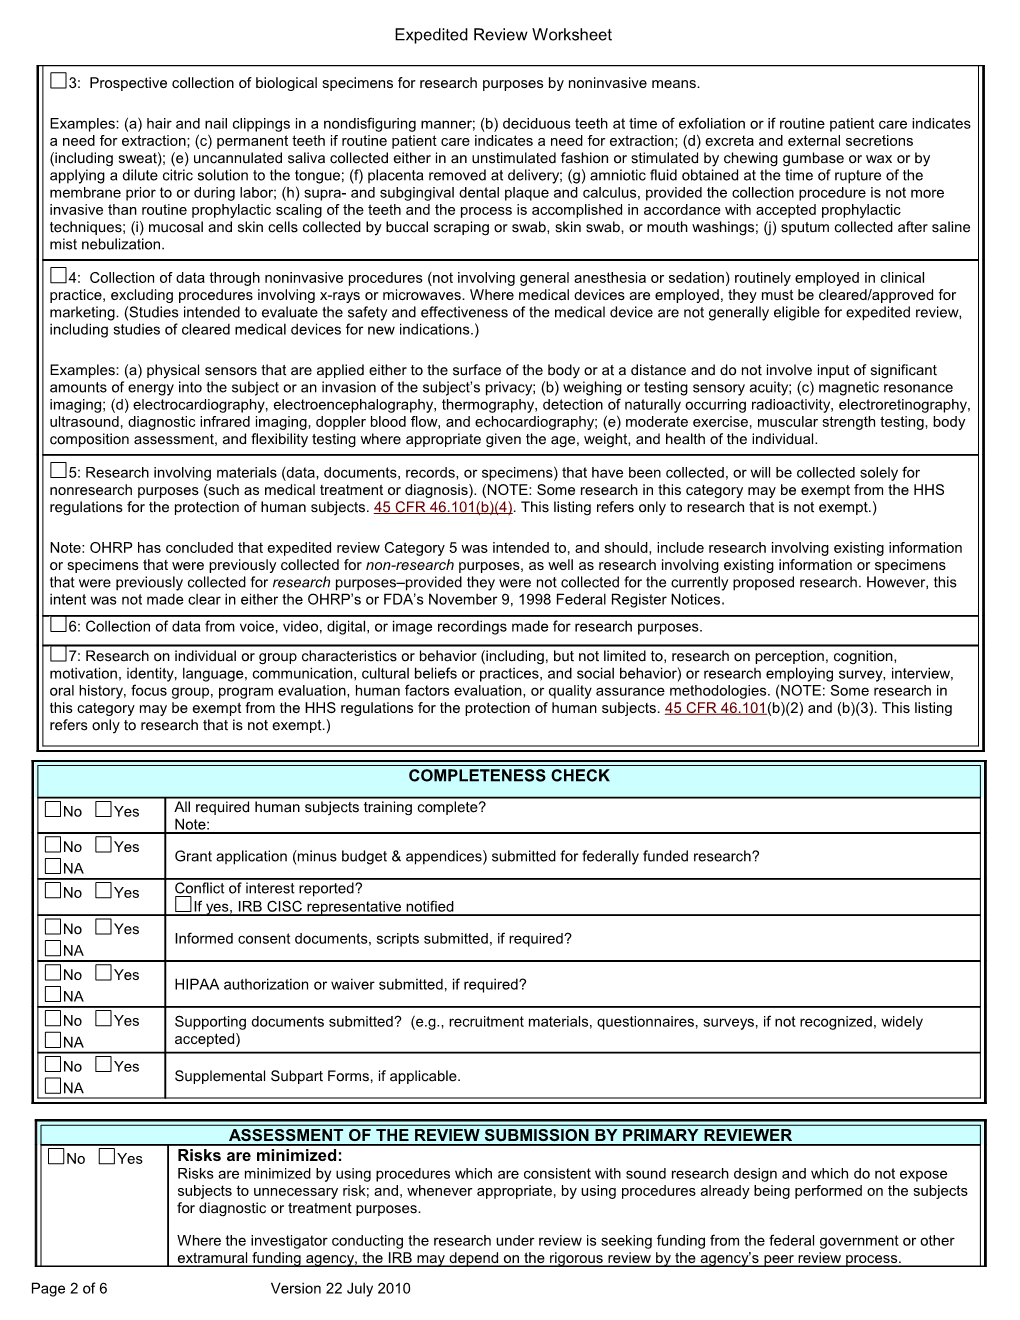 Expedited Review Worksheet